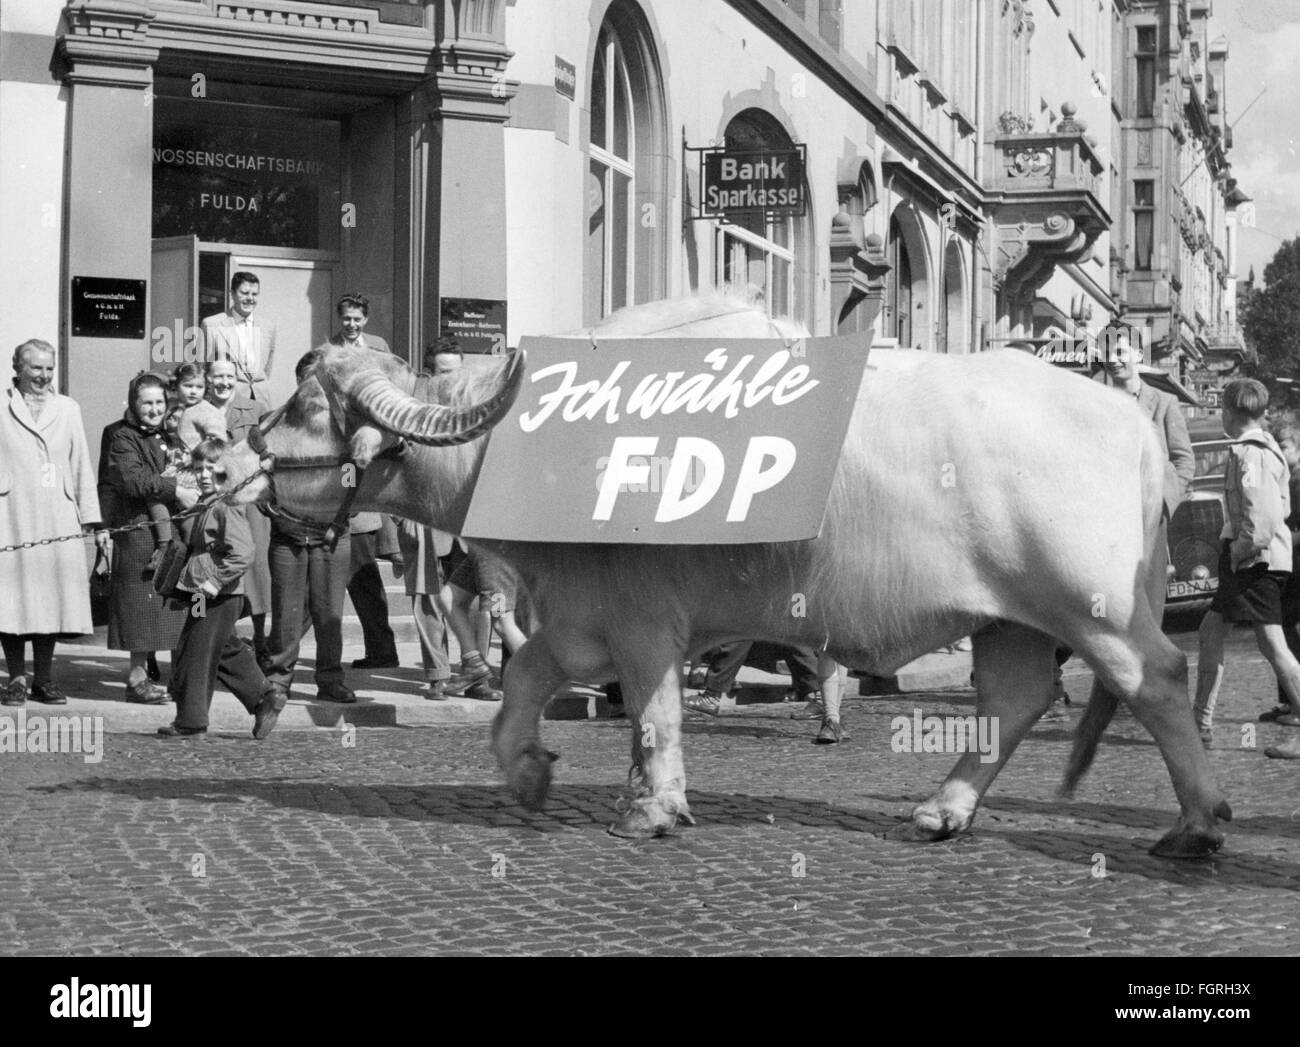 politics, elections, campaign for the Election to the Federal Diet 1957, animals of the circus Krone during the canvassing for the Free Democratic Party (Liberal Democratic Party), Fulda, 1957, water buffalo, water buffalos, advertising, Hesse, West Germany, Western Germany, people, spectator, spectators, domestic policy, home policy, 1950s, 50s, 20th century, politics, policy, elections, polls, election campaign, election campaigns, animals, animal, circus, circuses, crown, crowns, parties, political party, historic, historical, Additional-Rights-Clearences-Not Available Stock Photo